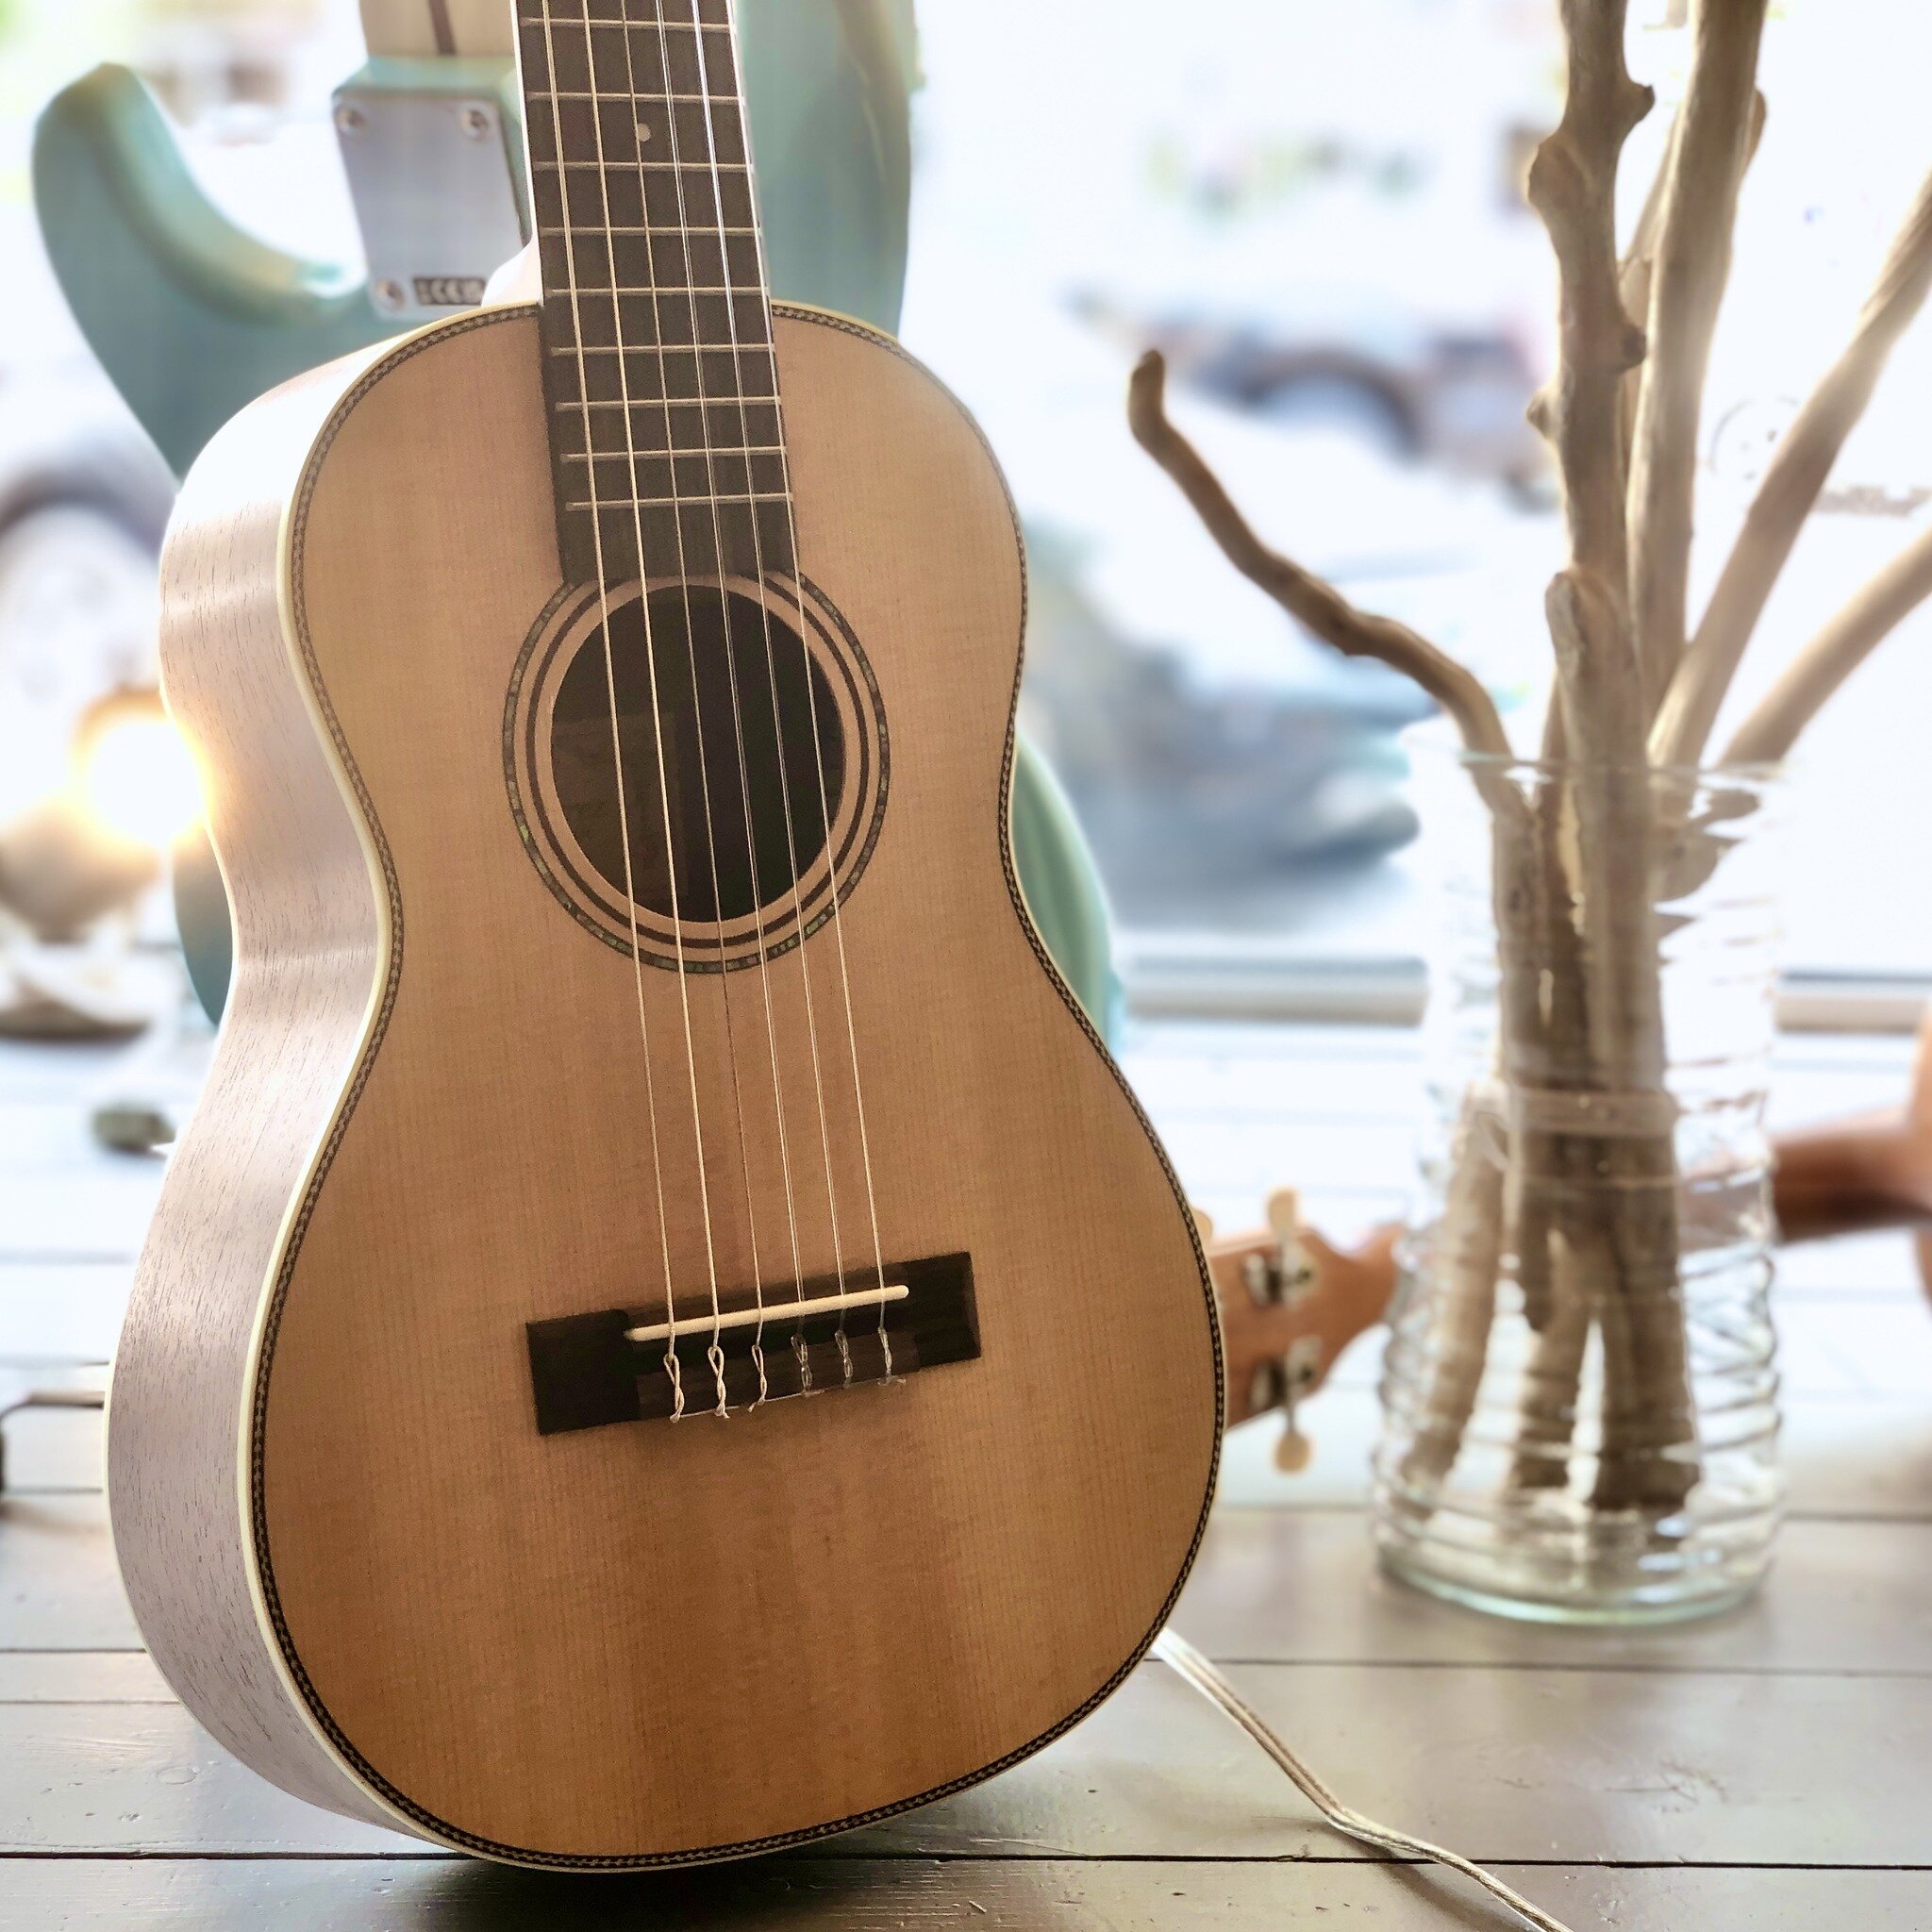 Ready for summer fun, it&rsquo;s the 6-String Baritone (AKA Guitarlele!) from Alvarez. This instrument is a great choice for players looking for a uke sized, travel guitar.  With 6 strings tuned A to A you have new sonic registers to explore, while a